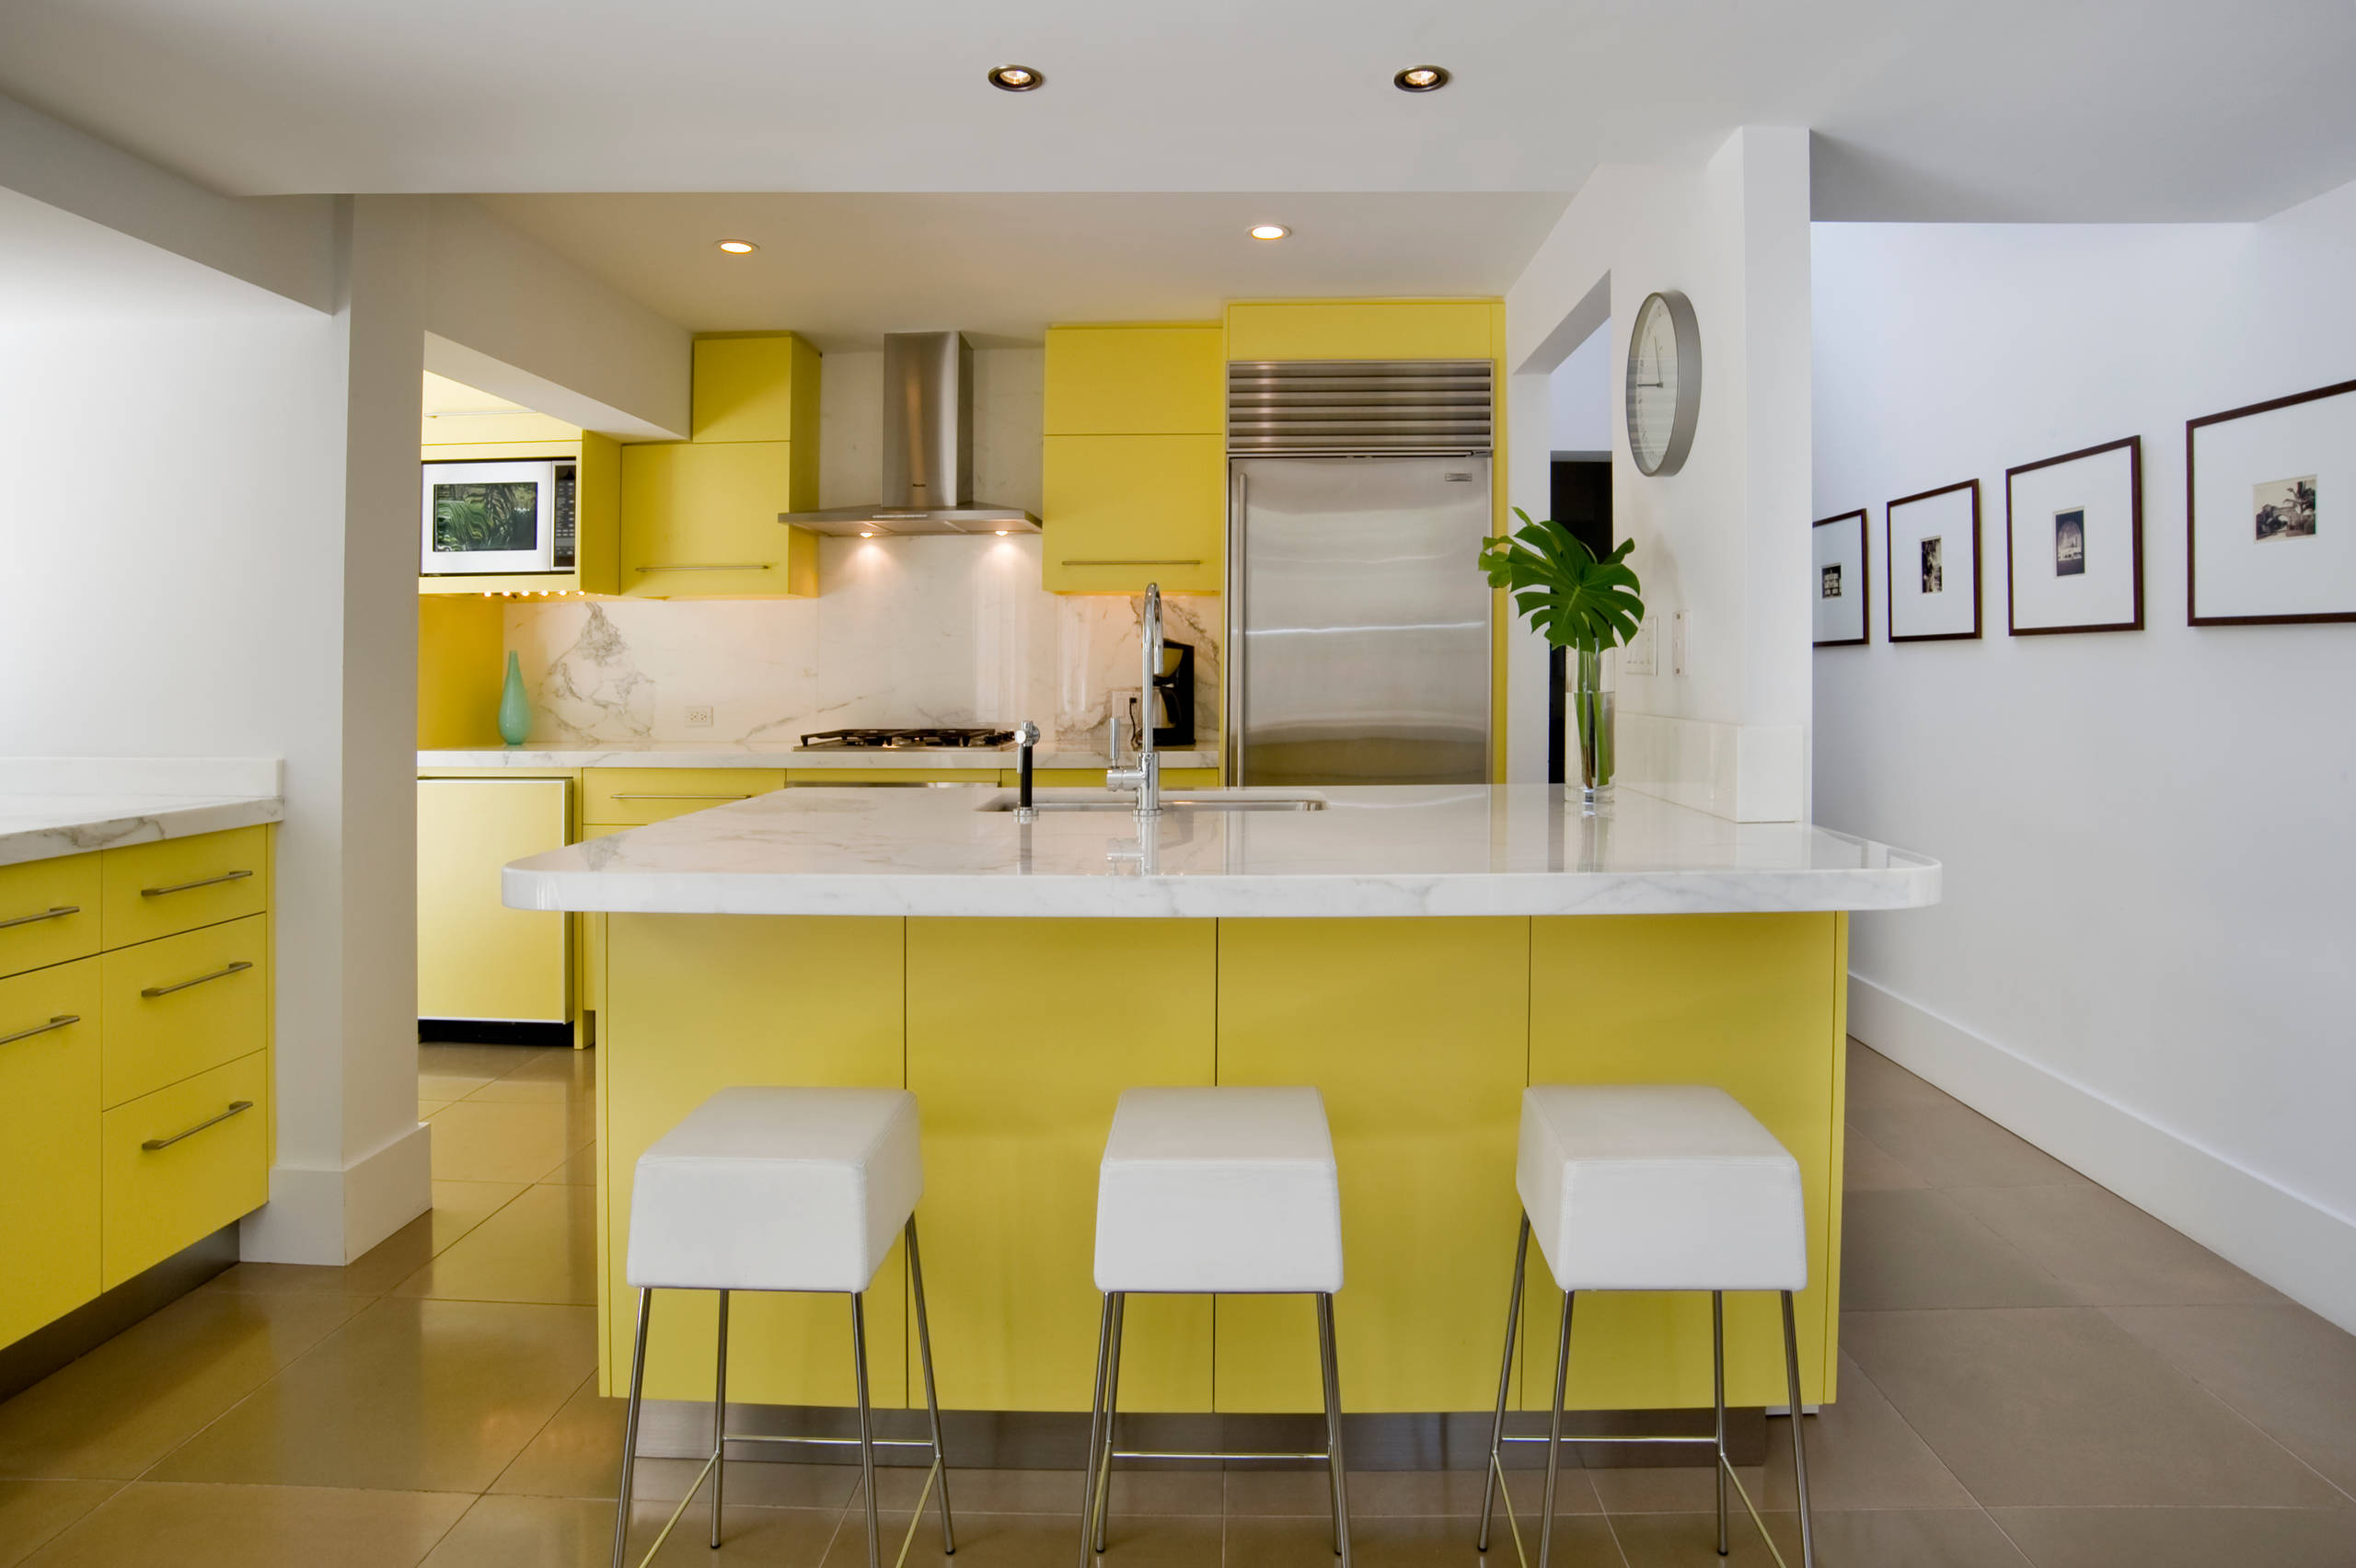 75 Beautiful Green Kitchen With Yellow Cabinets Pictures Ideas November 2020 Houzz